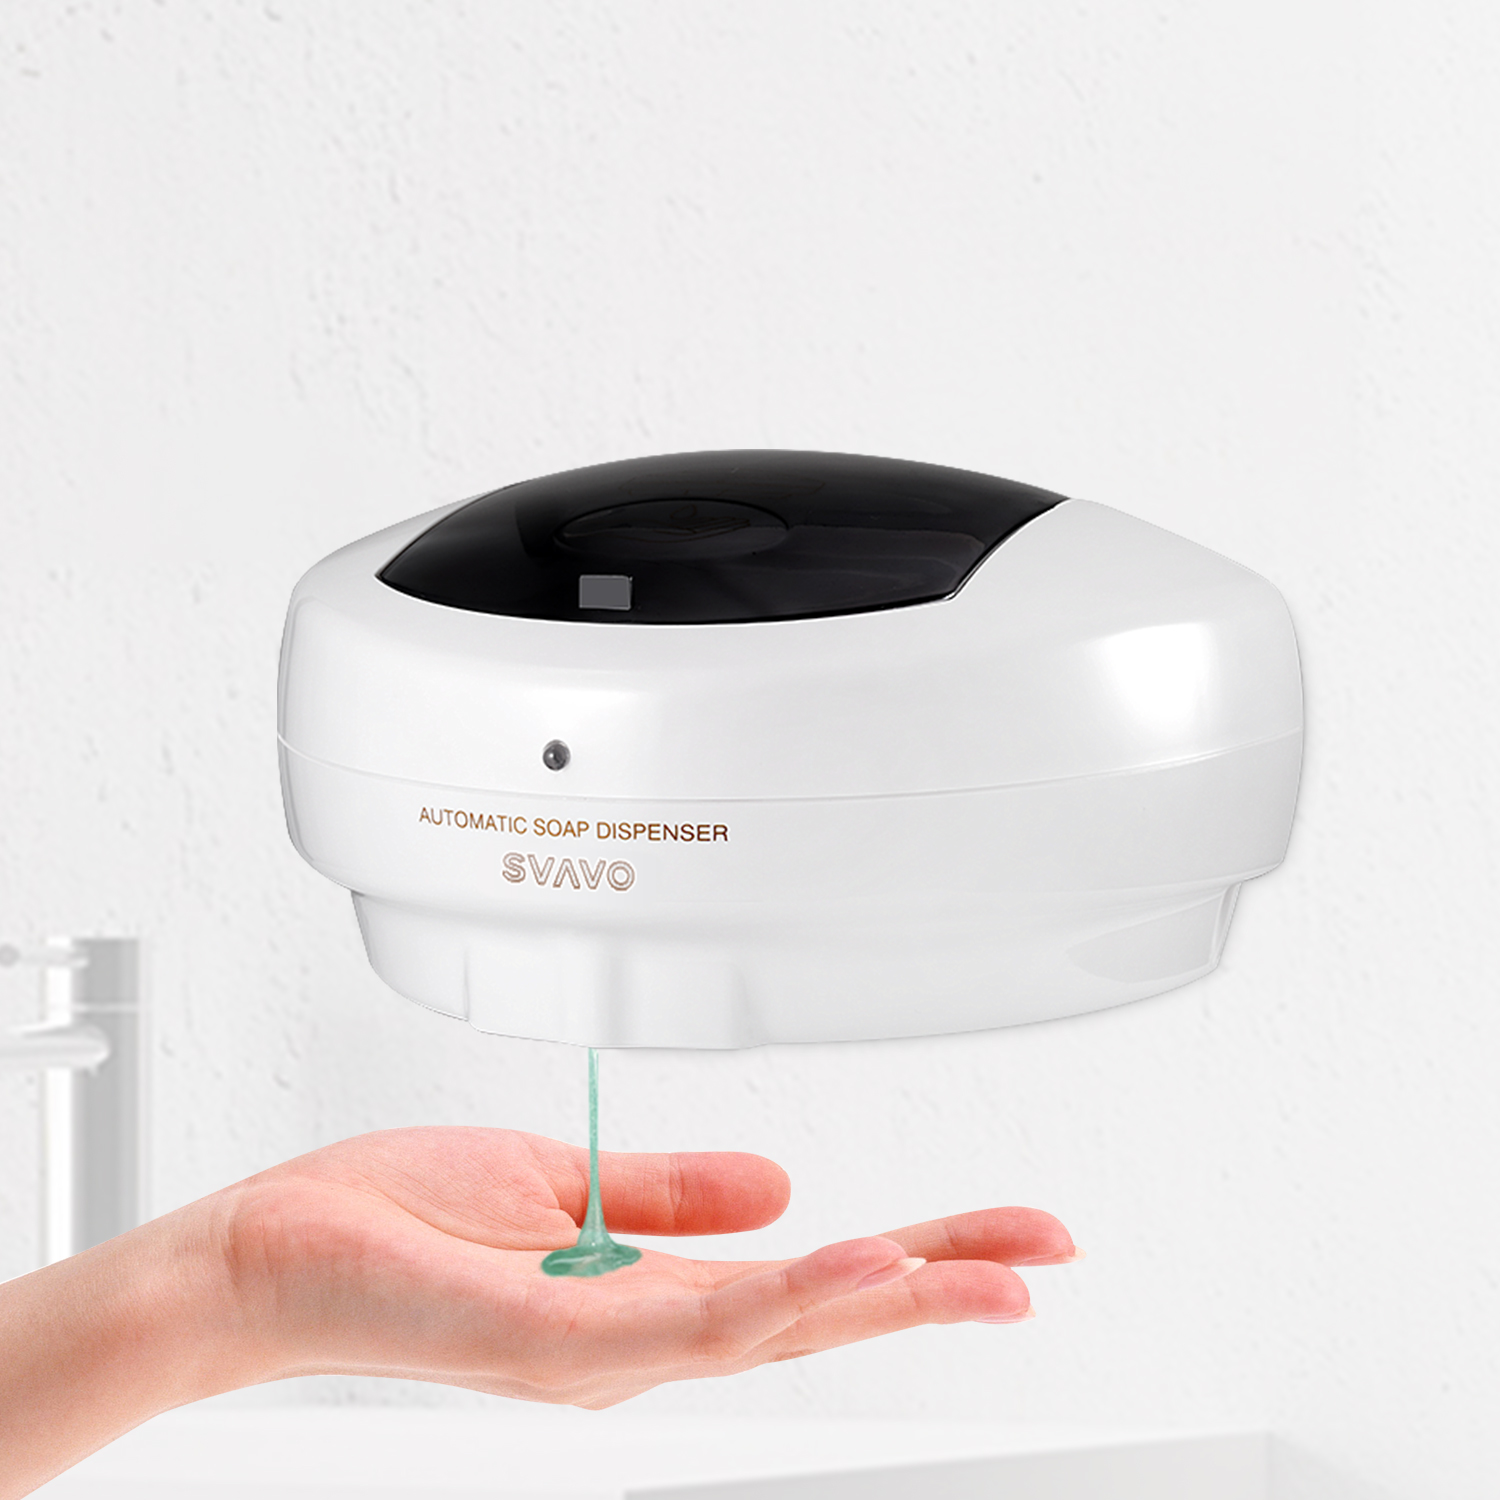 Touchless Commercial Automatic Wall Soap Dispenser SVAVO